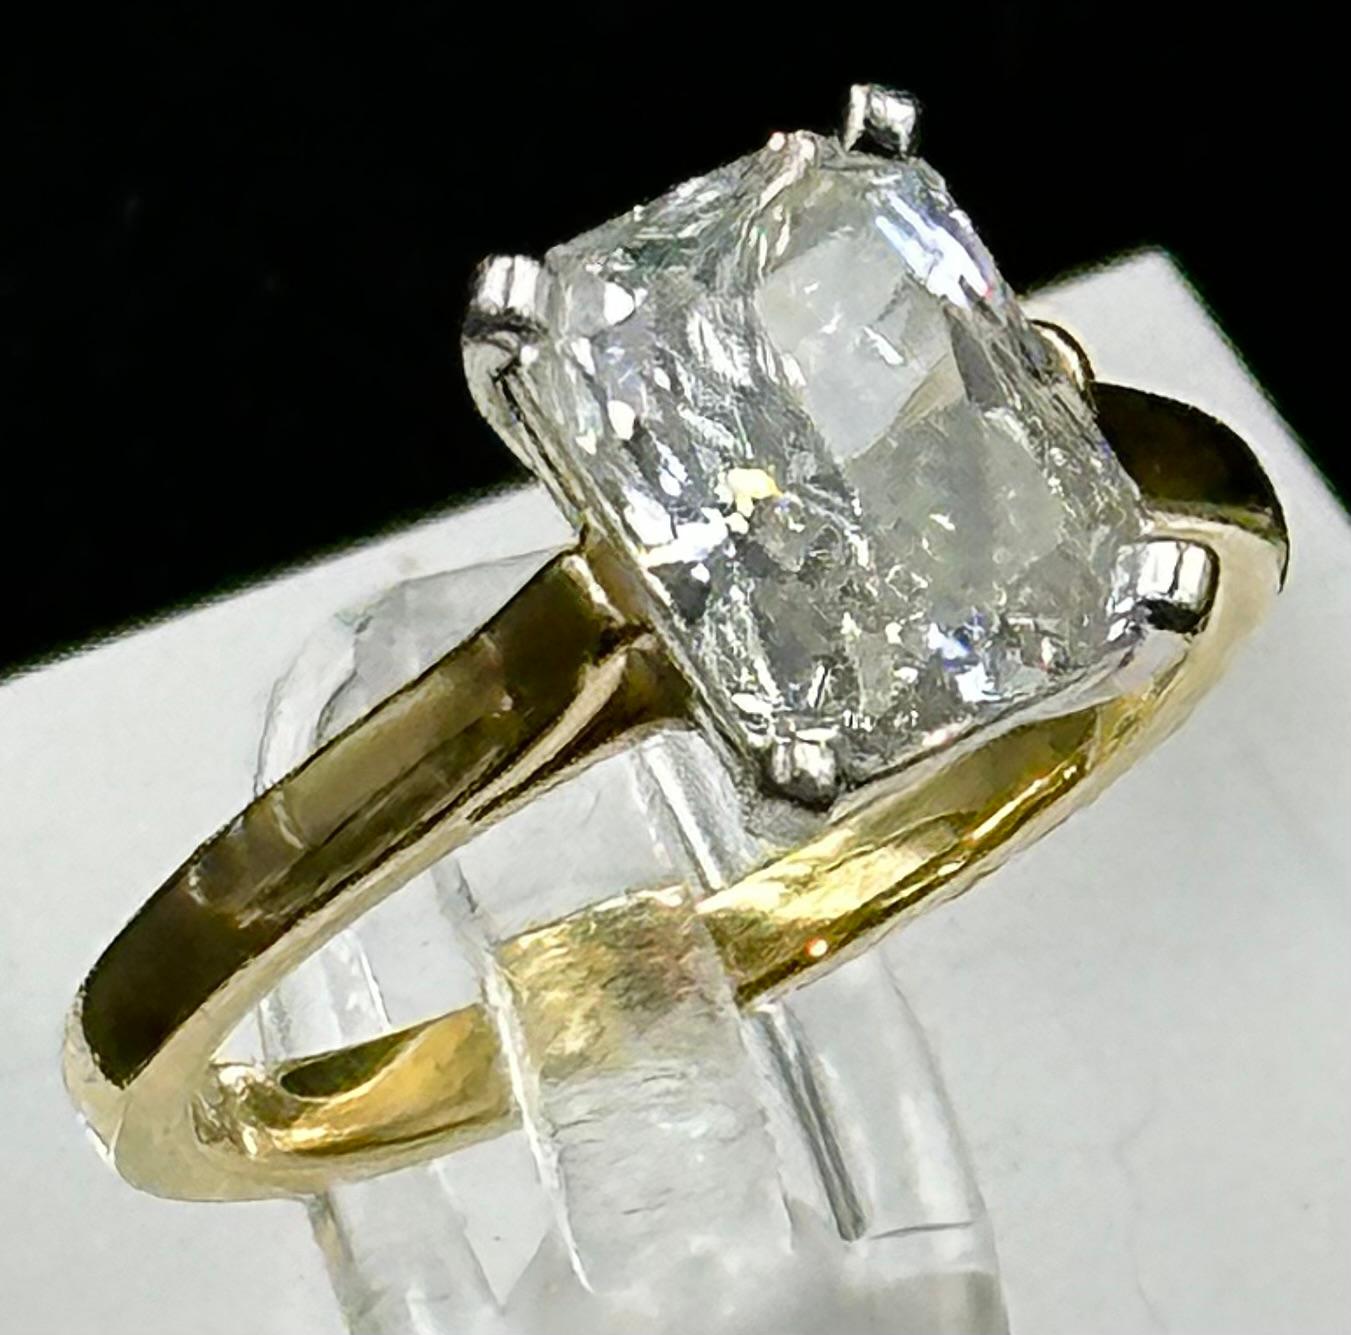 2.10ct Cushion cut diamond solitaire ring mounted in platinum and 18ct gold. Signed Tiffany & Co. - Image 3 of 5